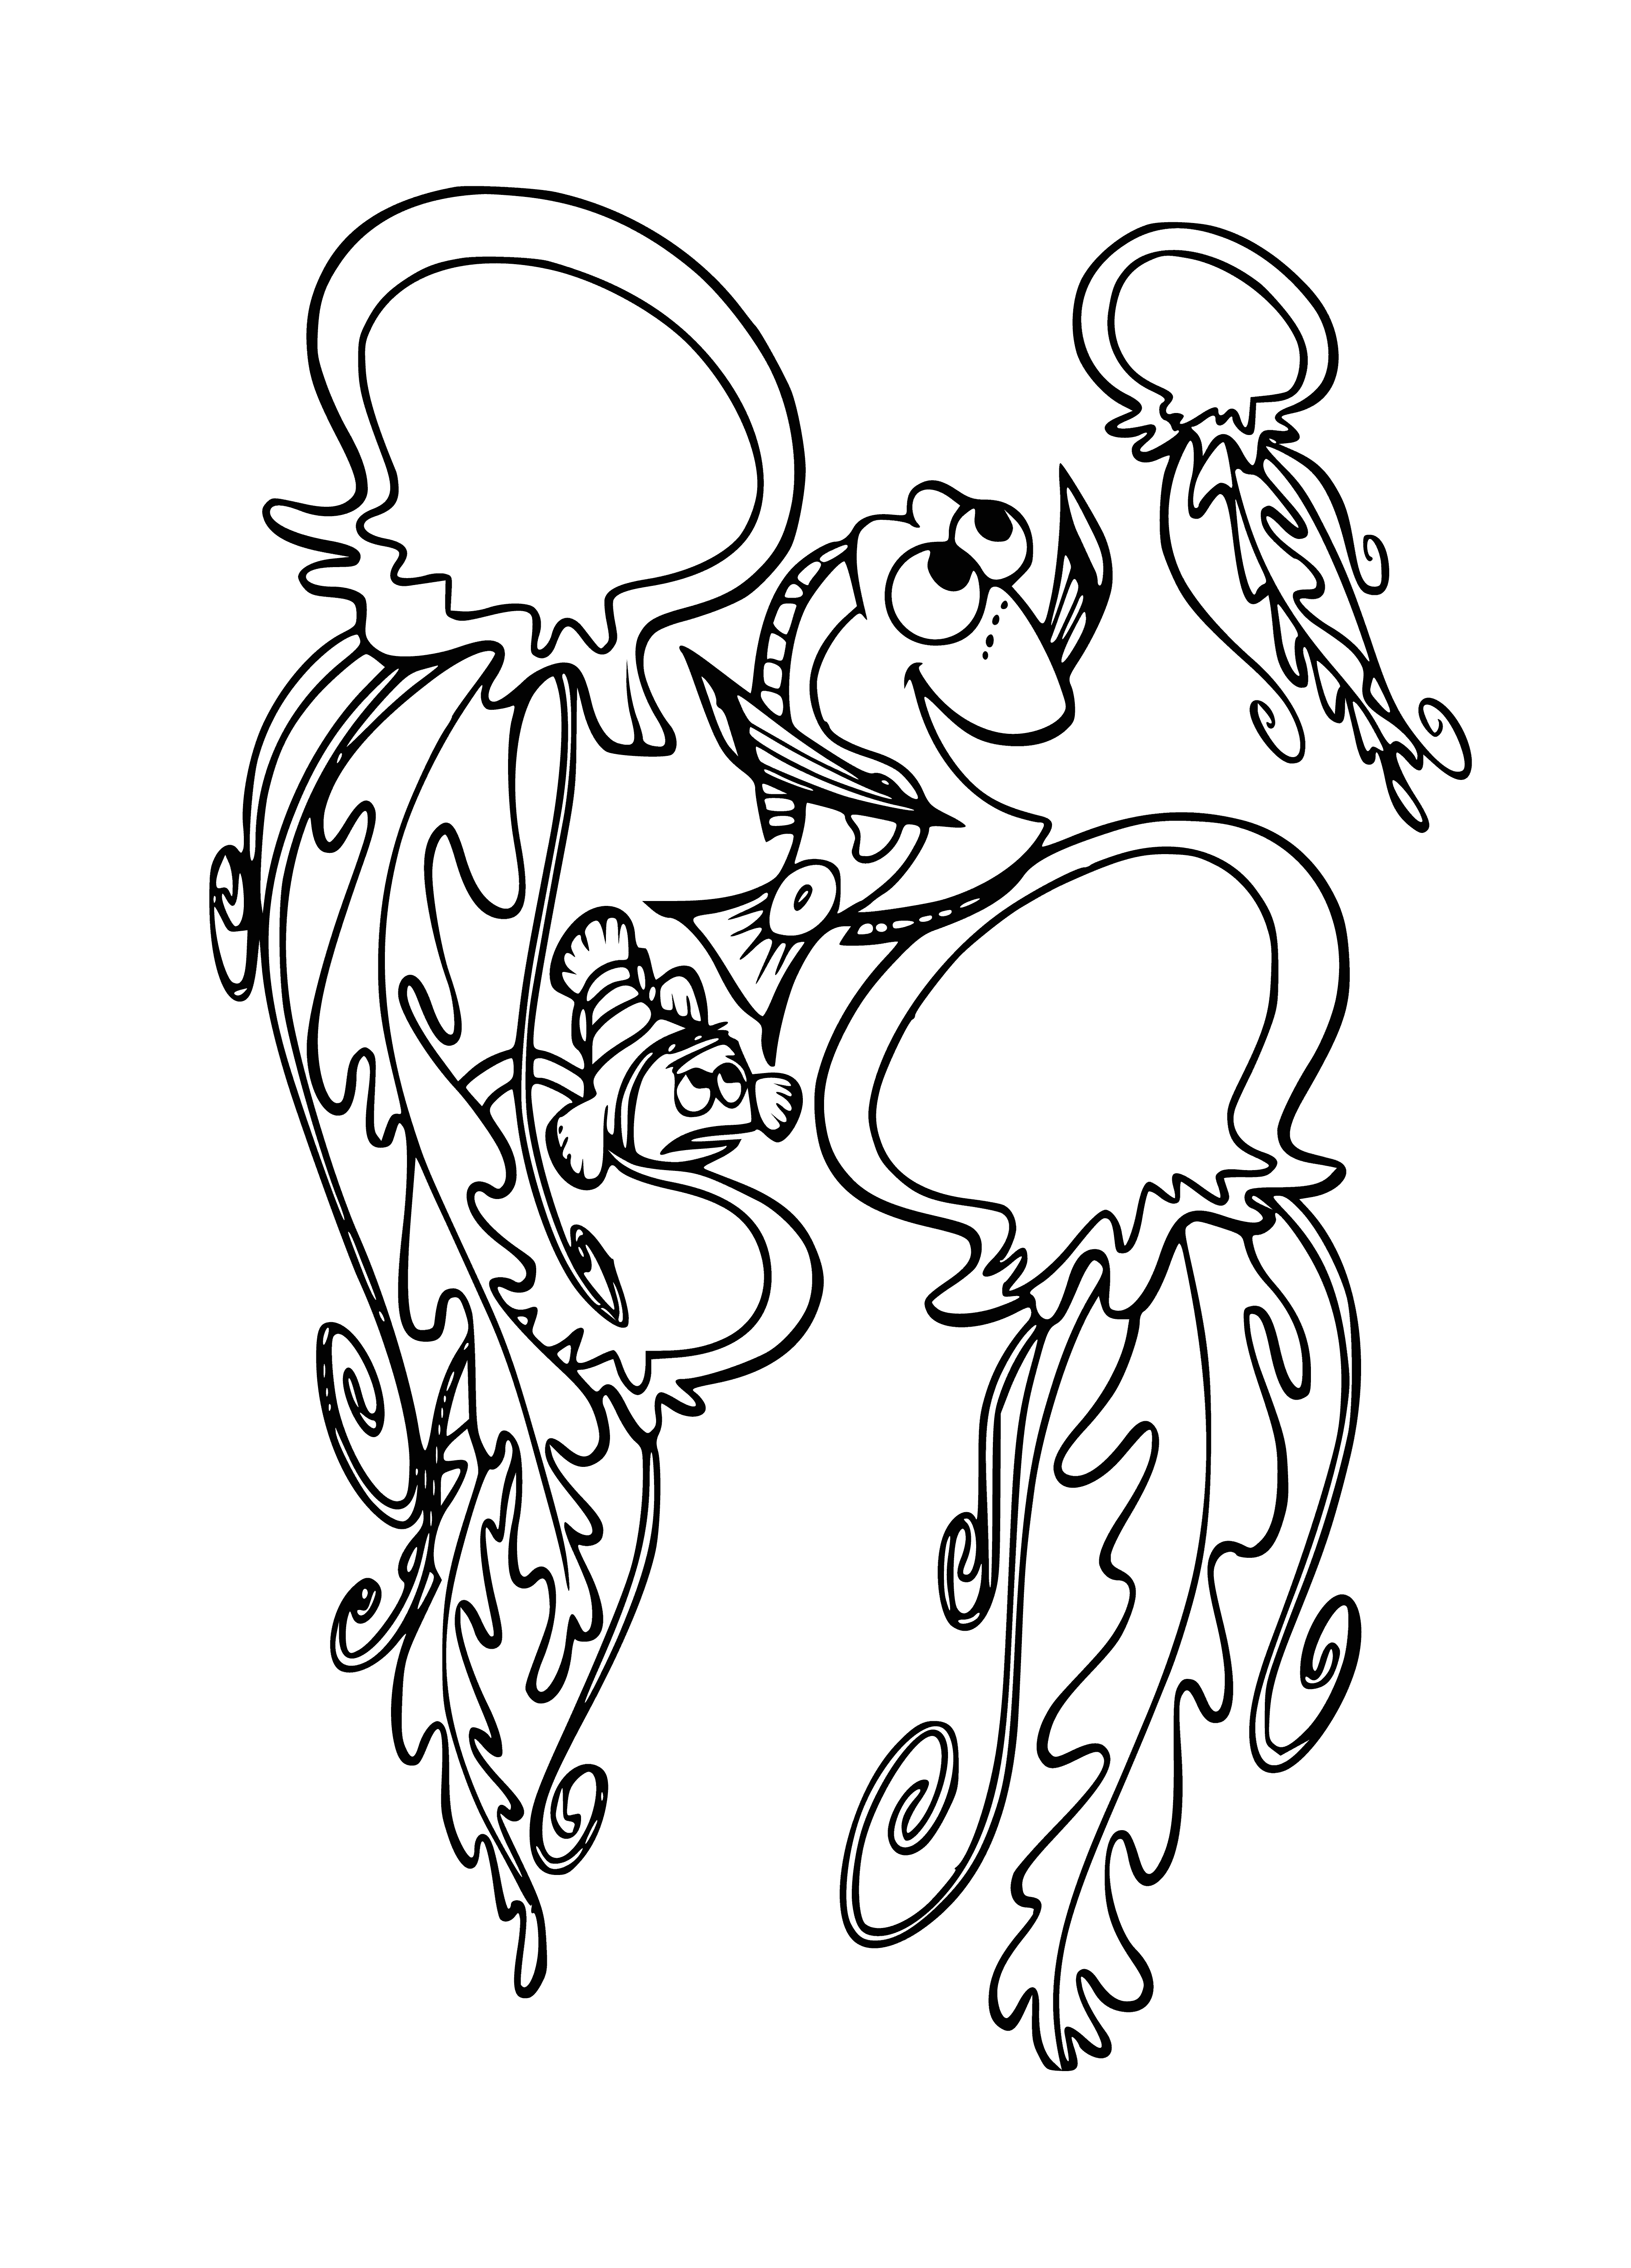 coloring page: School of jellyfish gracefully gliding through the open ocean, trailing their long tentacles behind them.